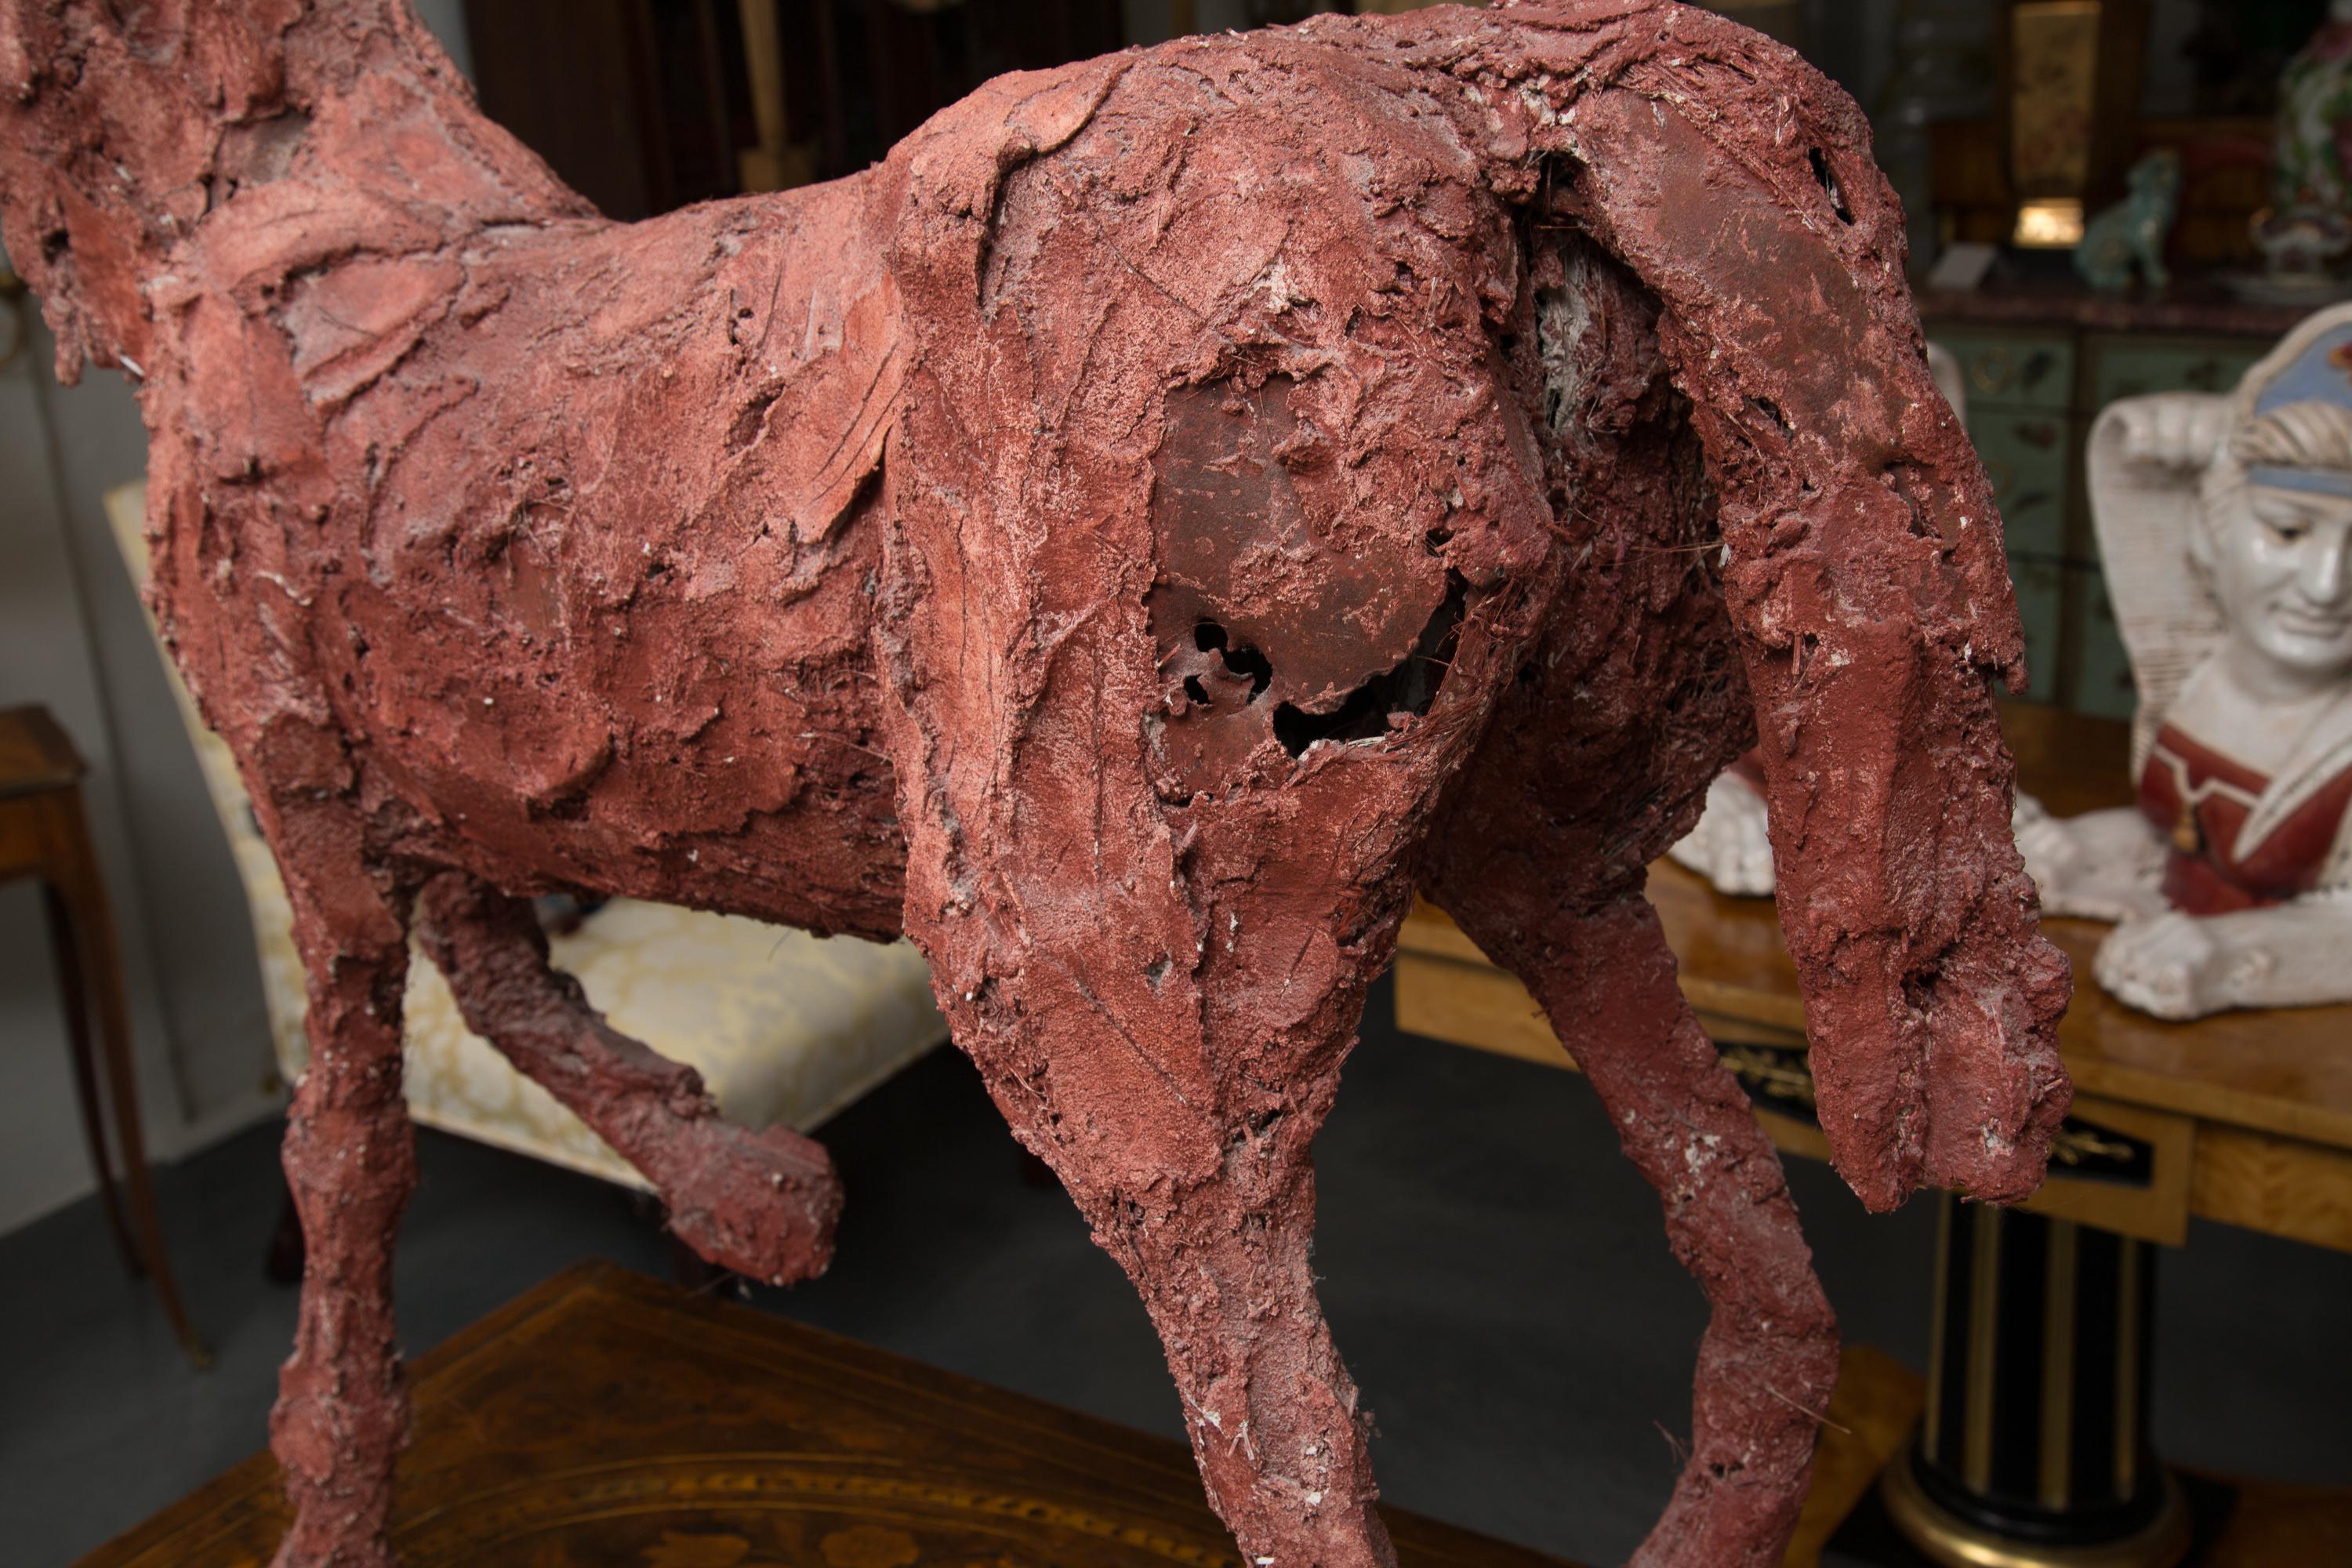 This impressive art piece was created by applying rough materials over a formed  structure. The horse is presented in full form. It appears that the color was added to the clay during the initial application.
The sculpture, by Siri Hollander follows